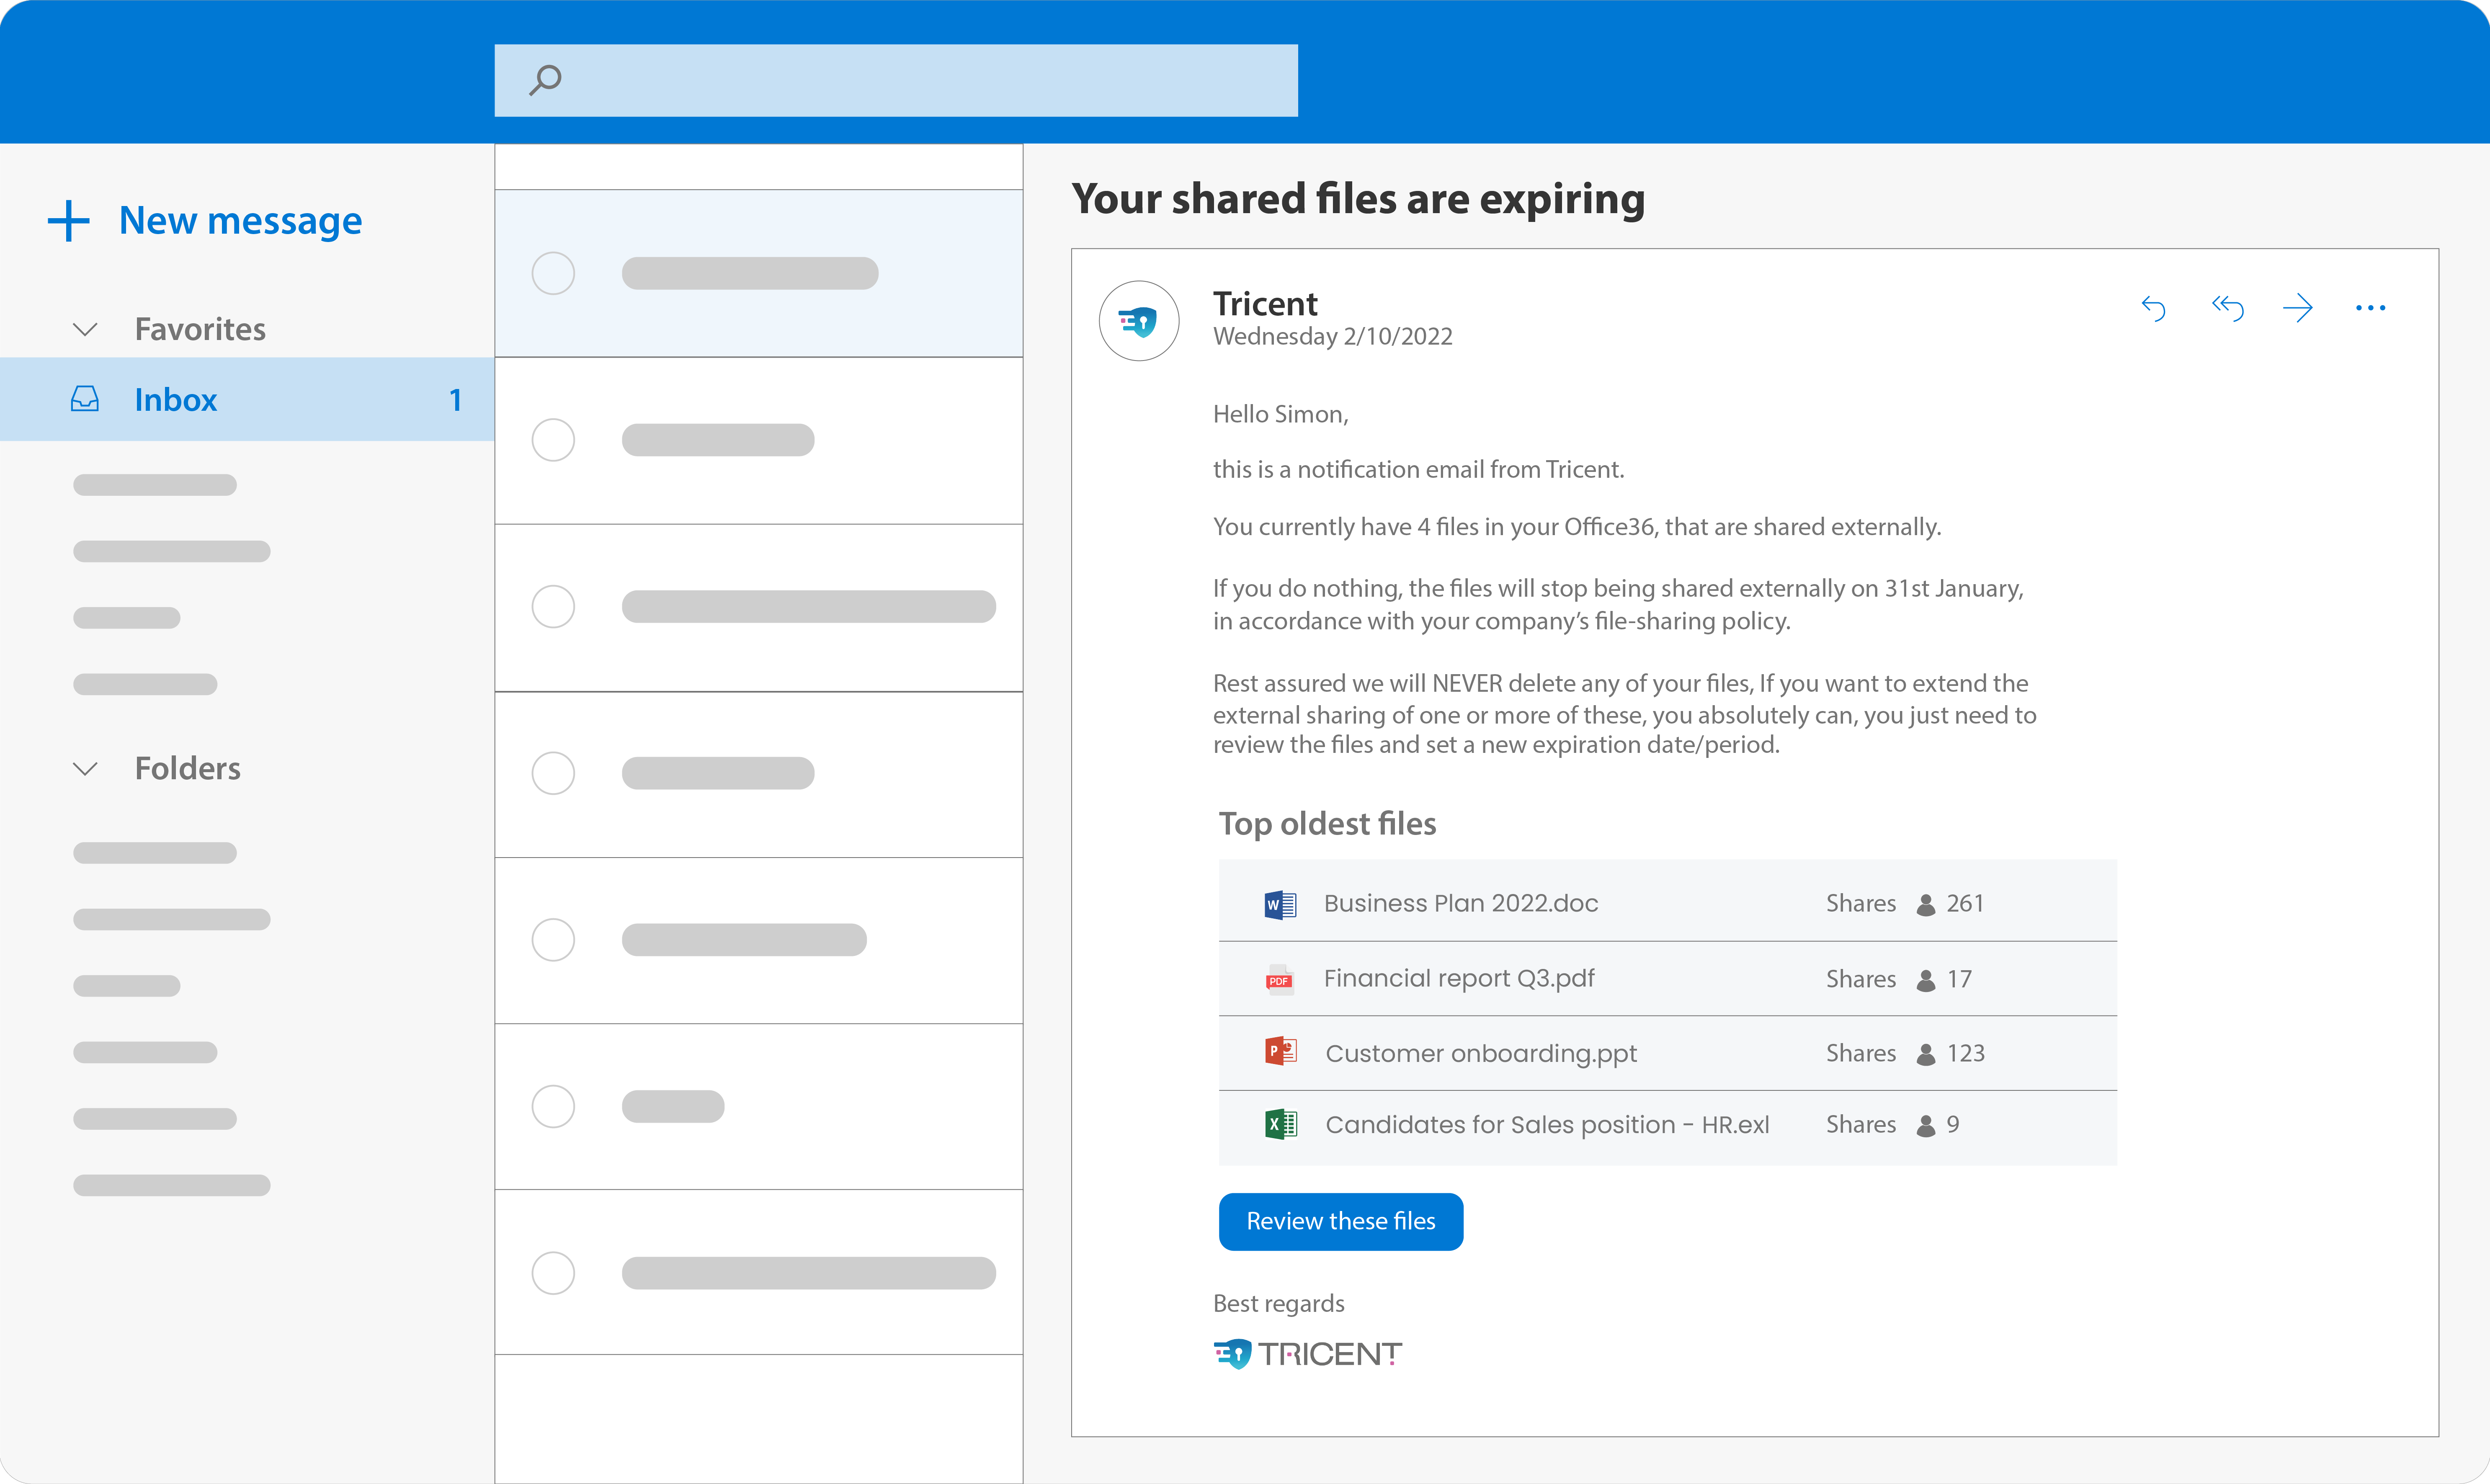 Users will automatically be notified when their shared files require a compliance review.